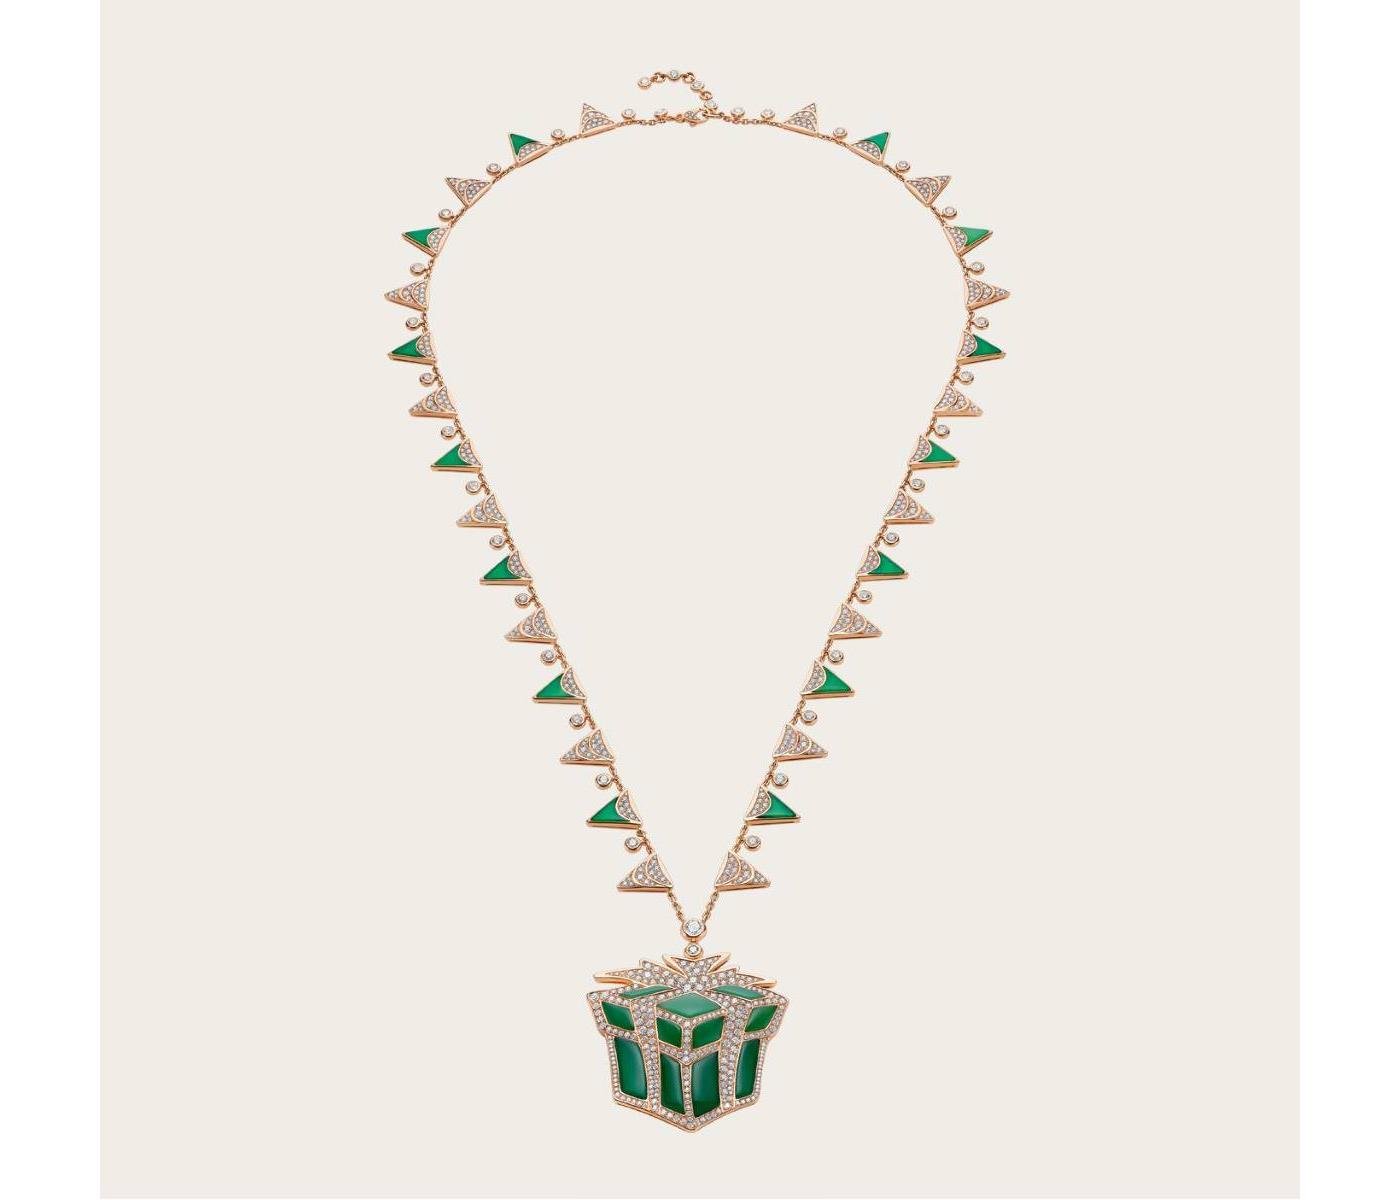 Necklace by Bulgari